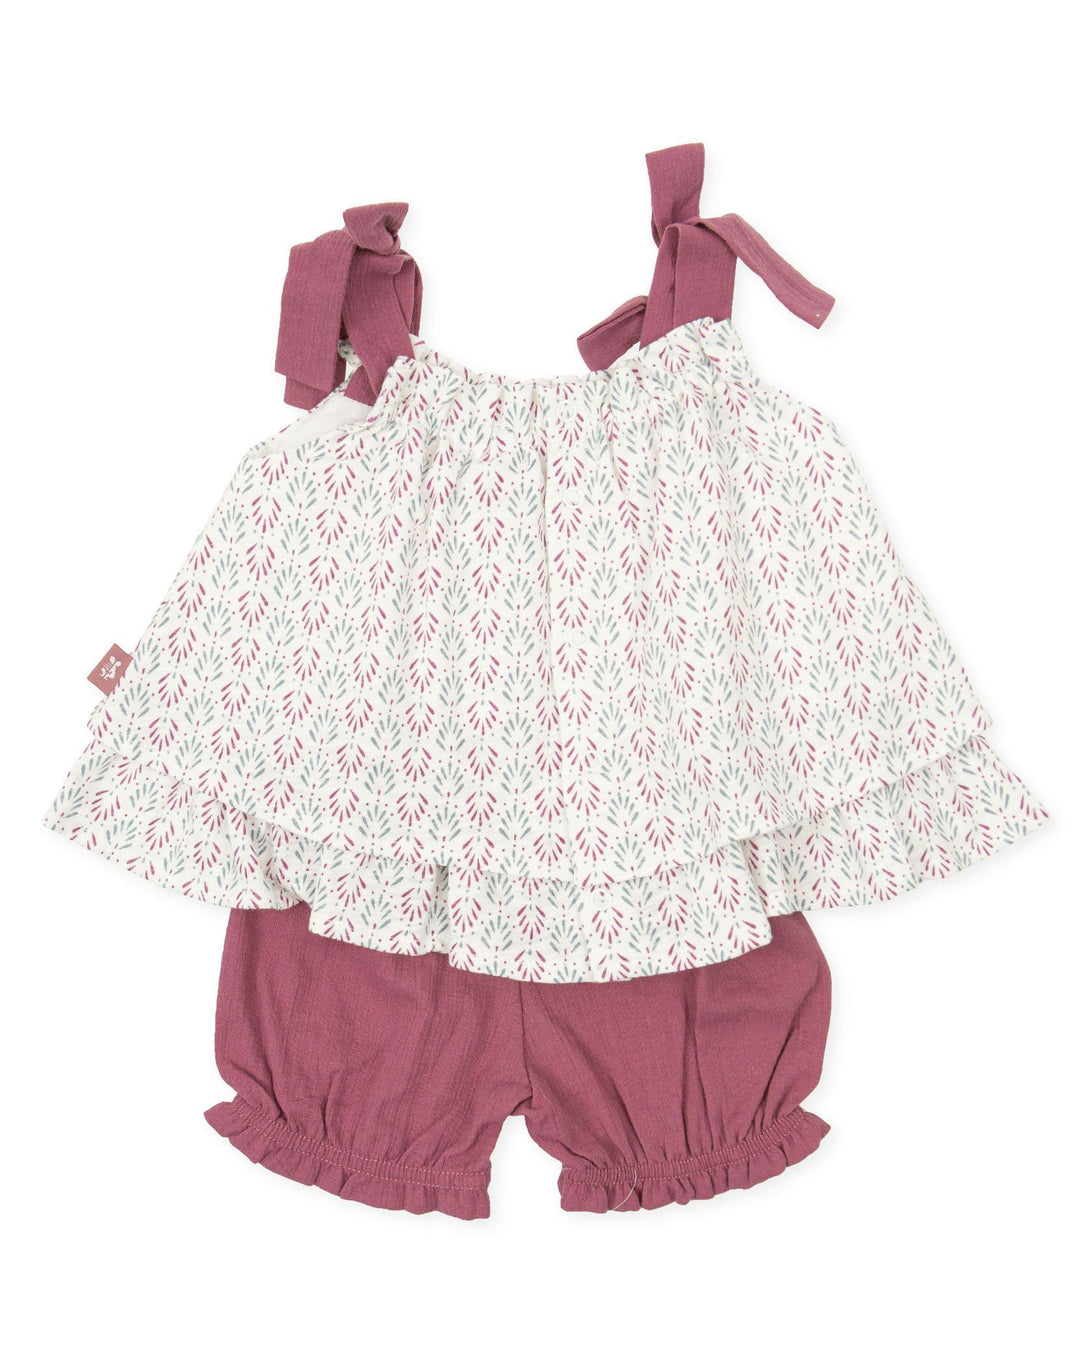 Tutto Piccolo "Brogan" Plum Patterned Blouse & Shorts | Millie and John